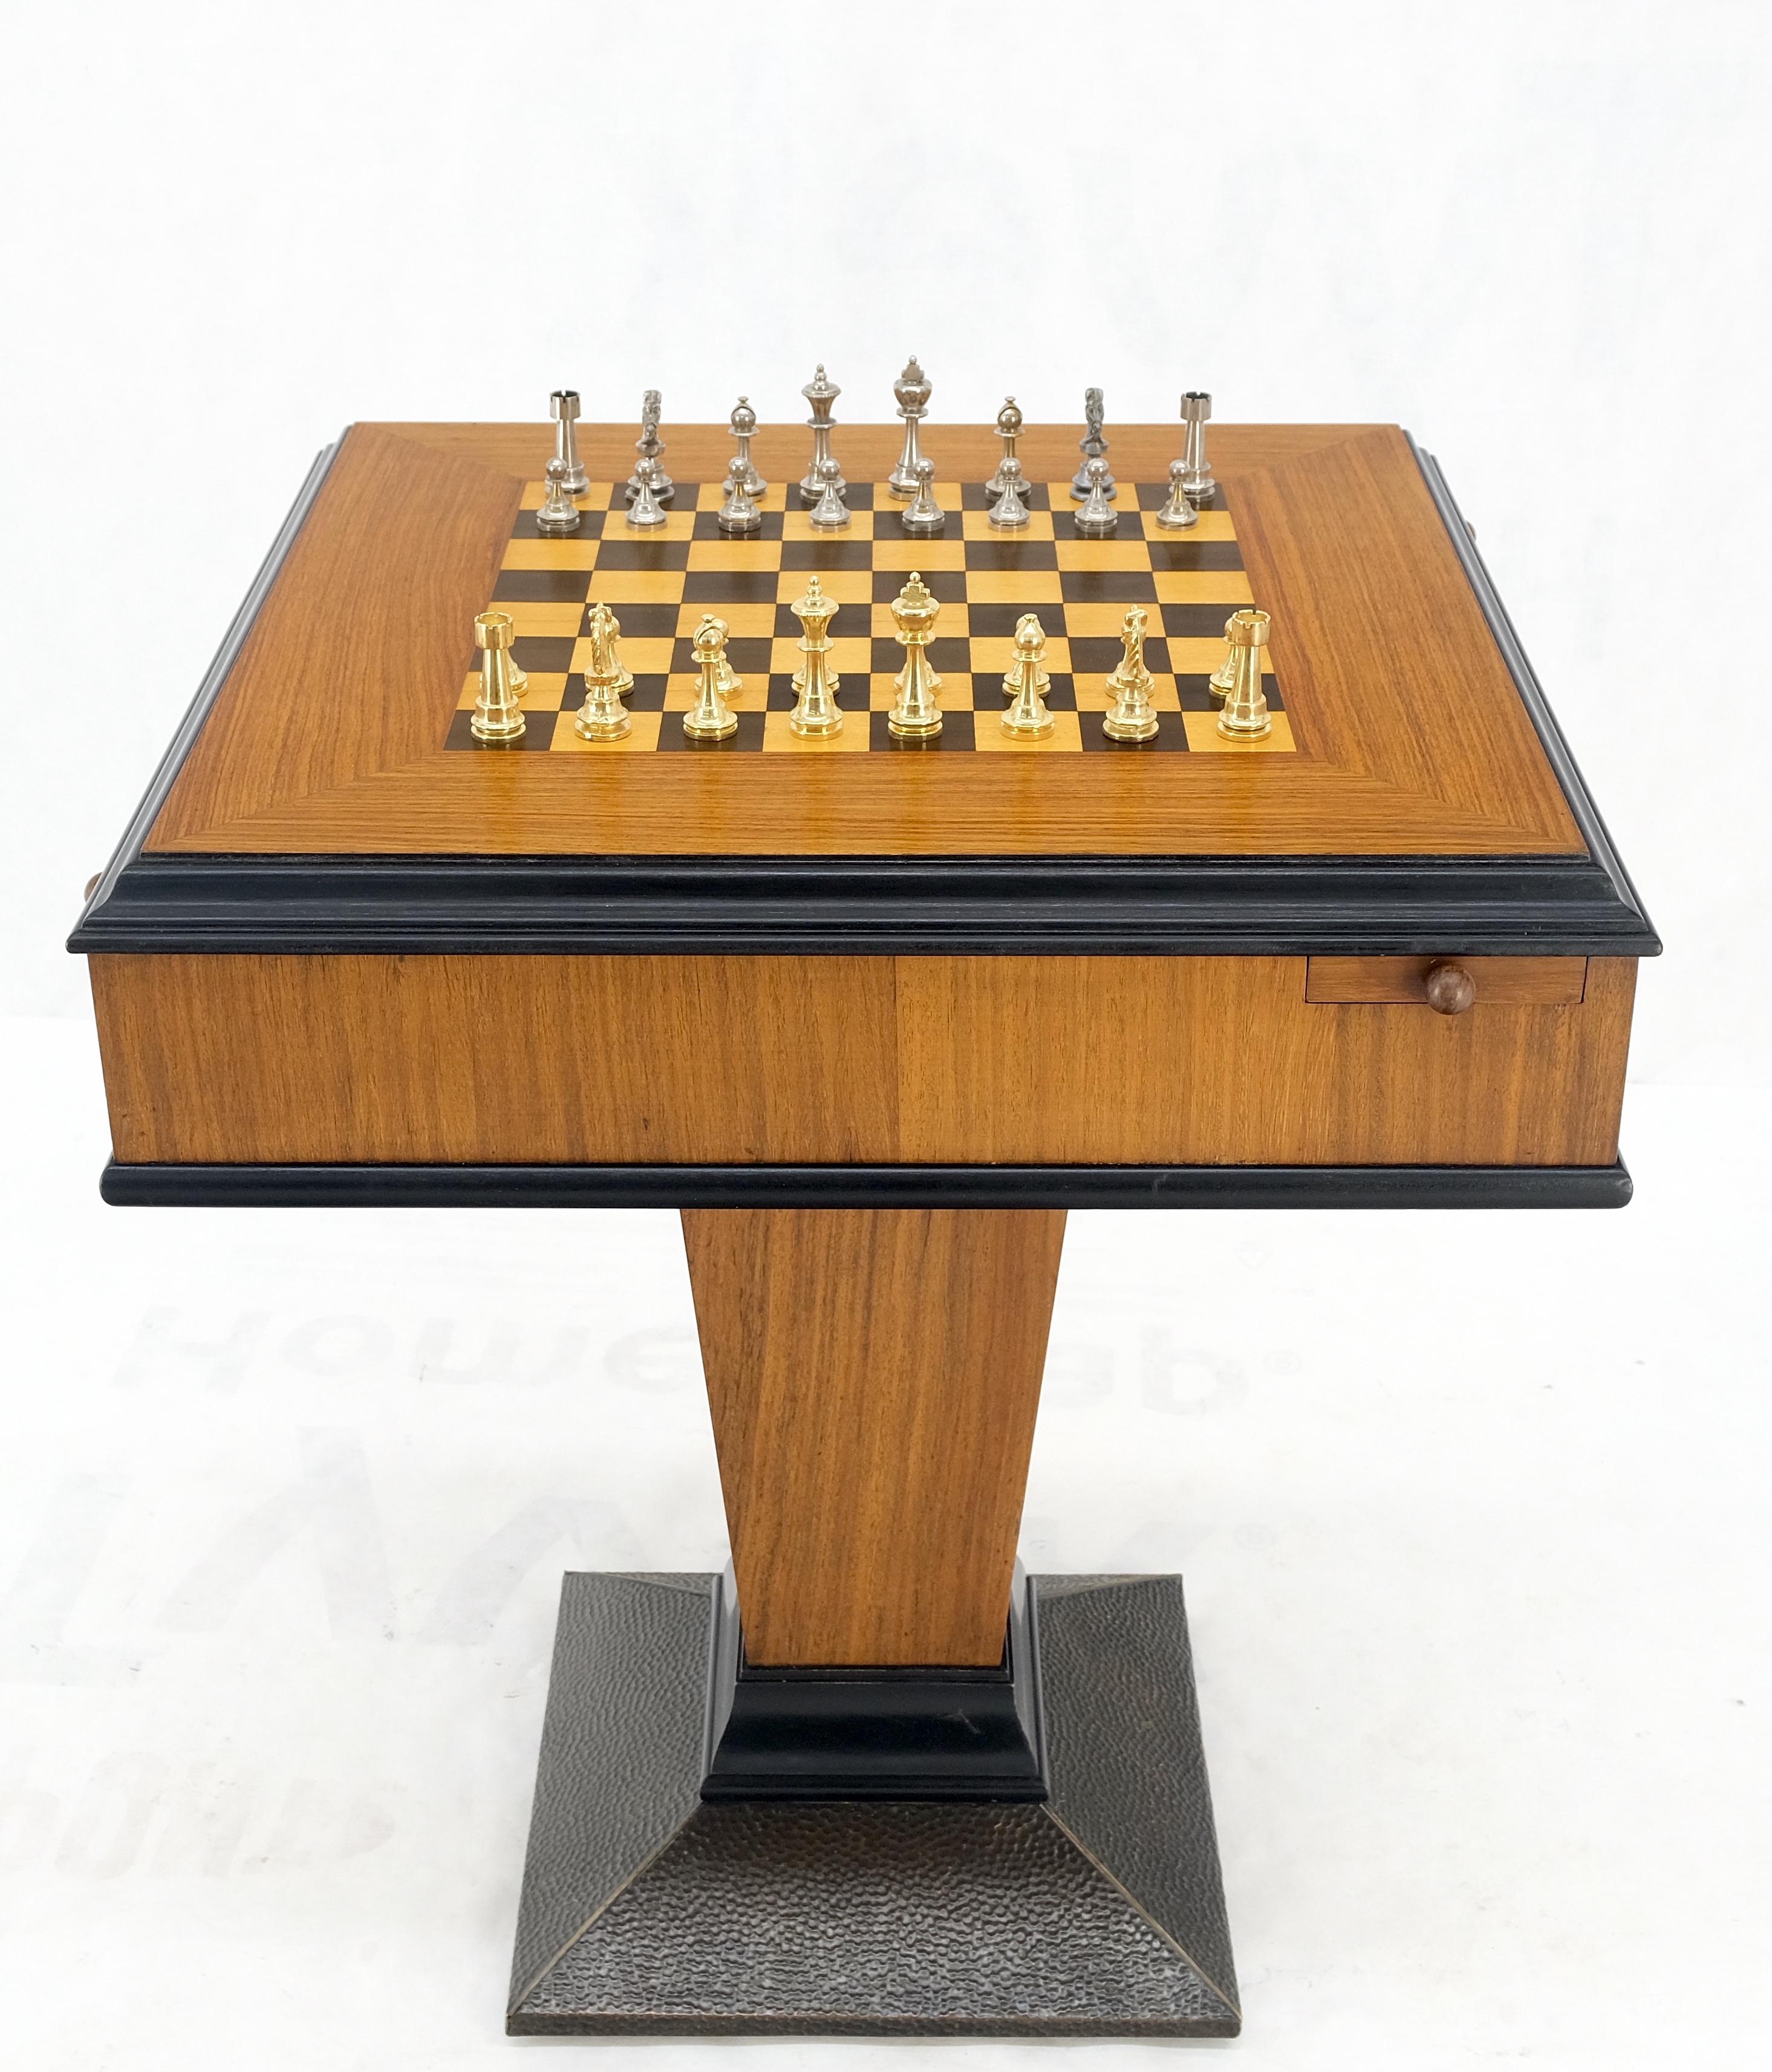 Art Deco Single Pedestal Square Game Table Pull Out Trays Chess Board Set Mint! im Angebot 4